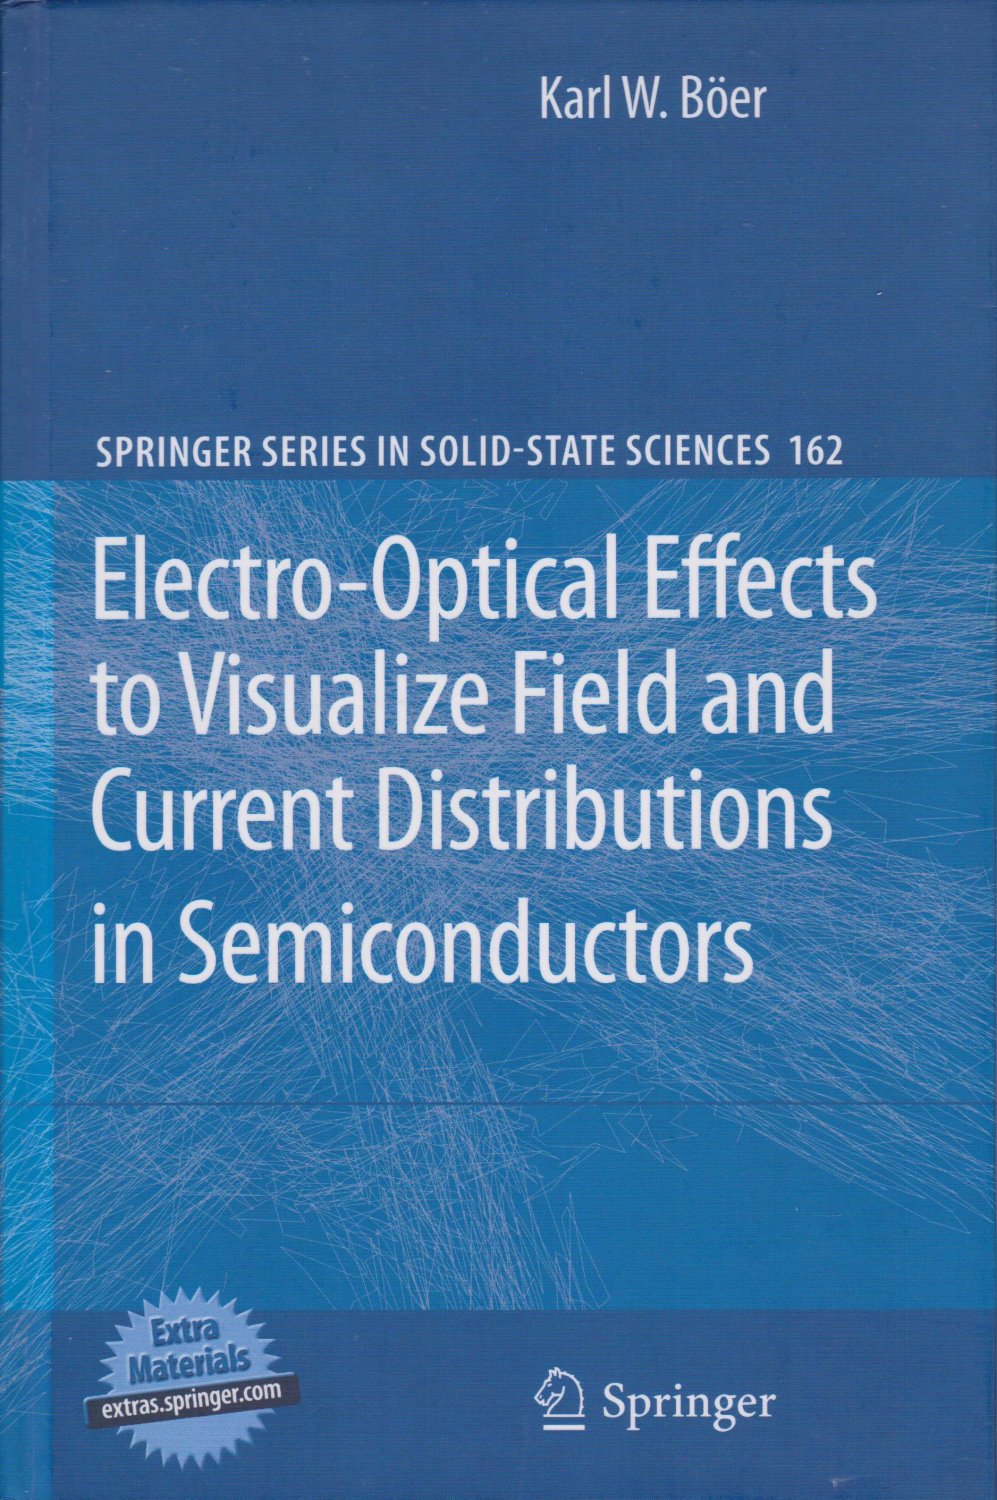 Electro-Optical Effects to Visualize Field and Current Distributions in Semiconductors.